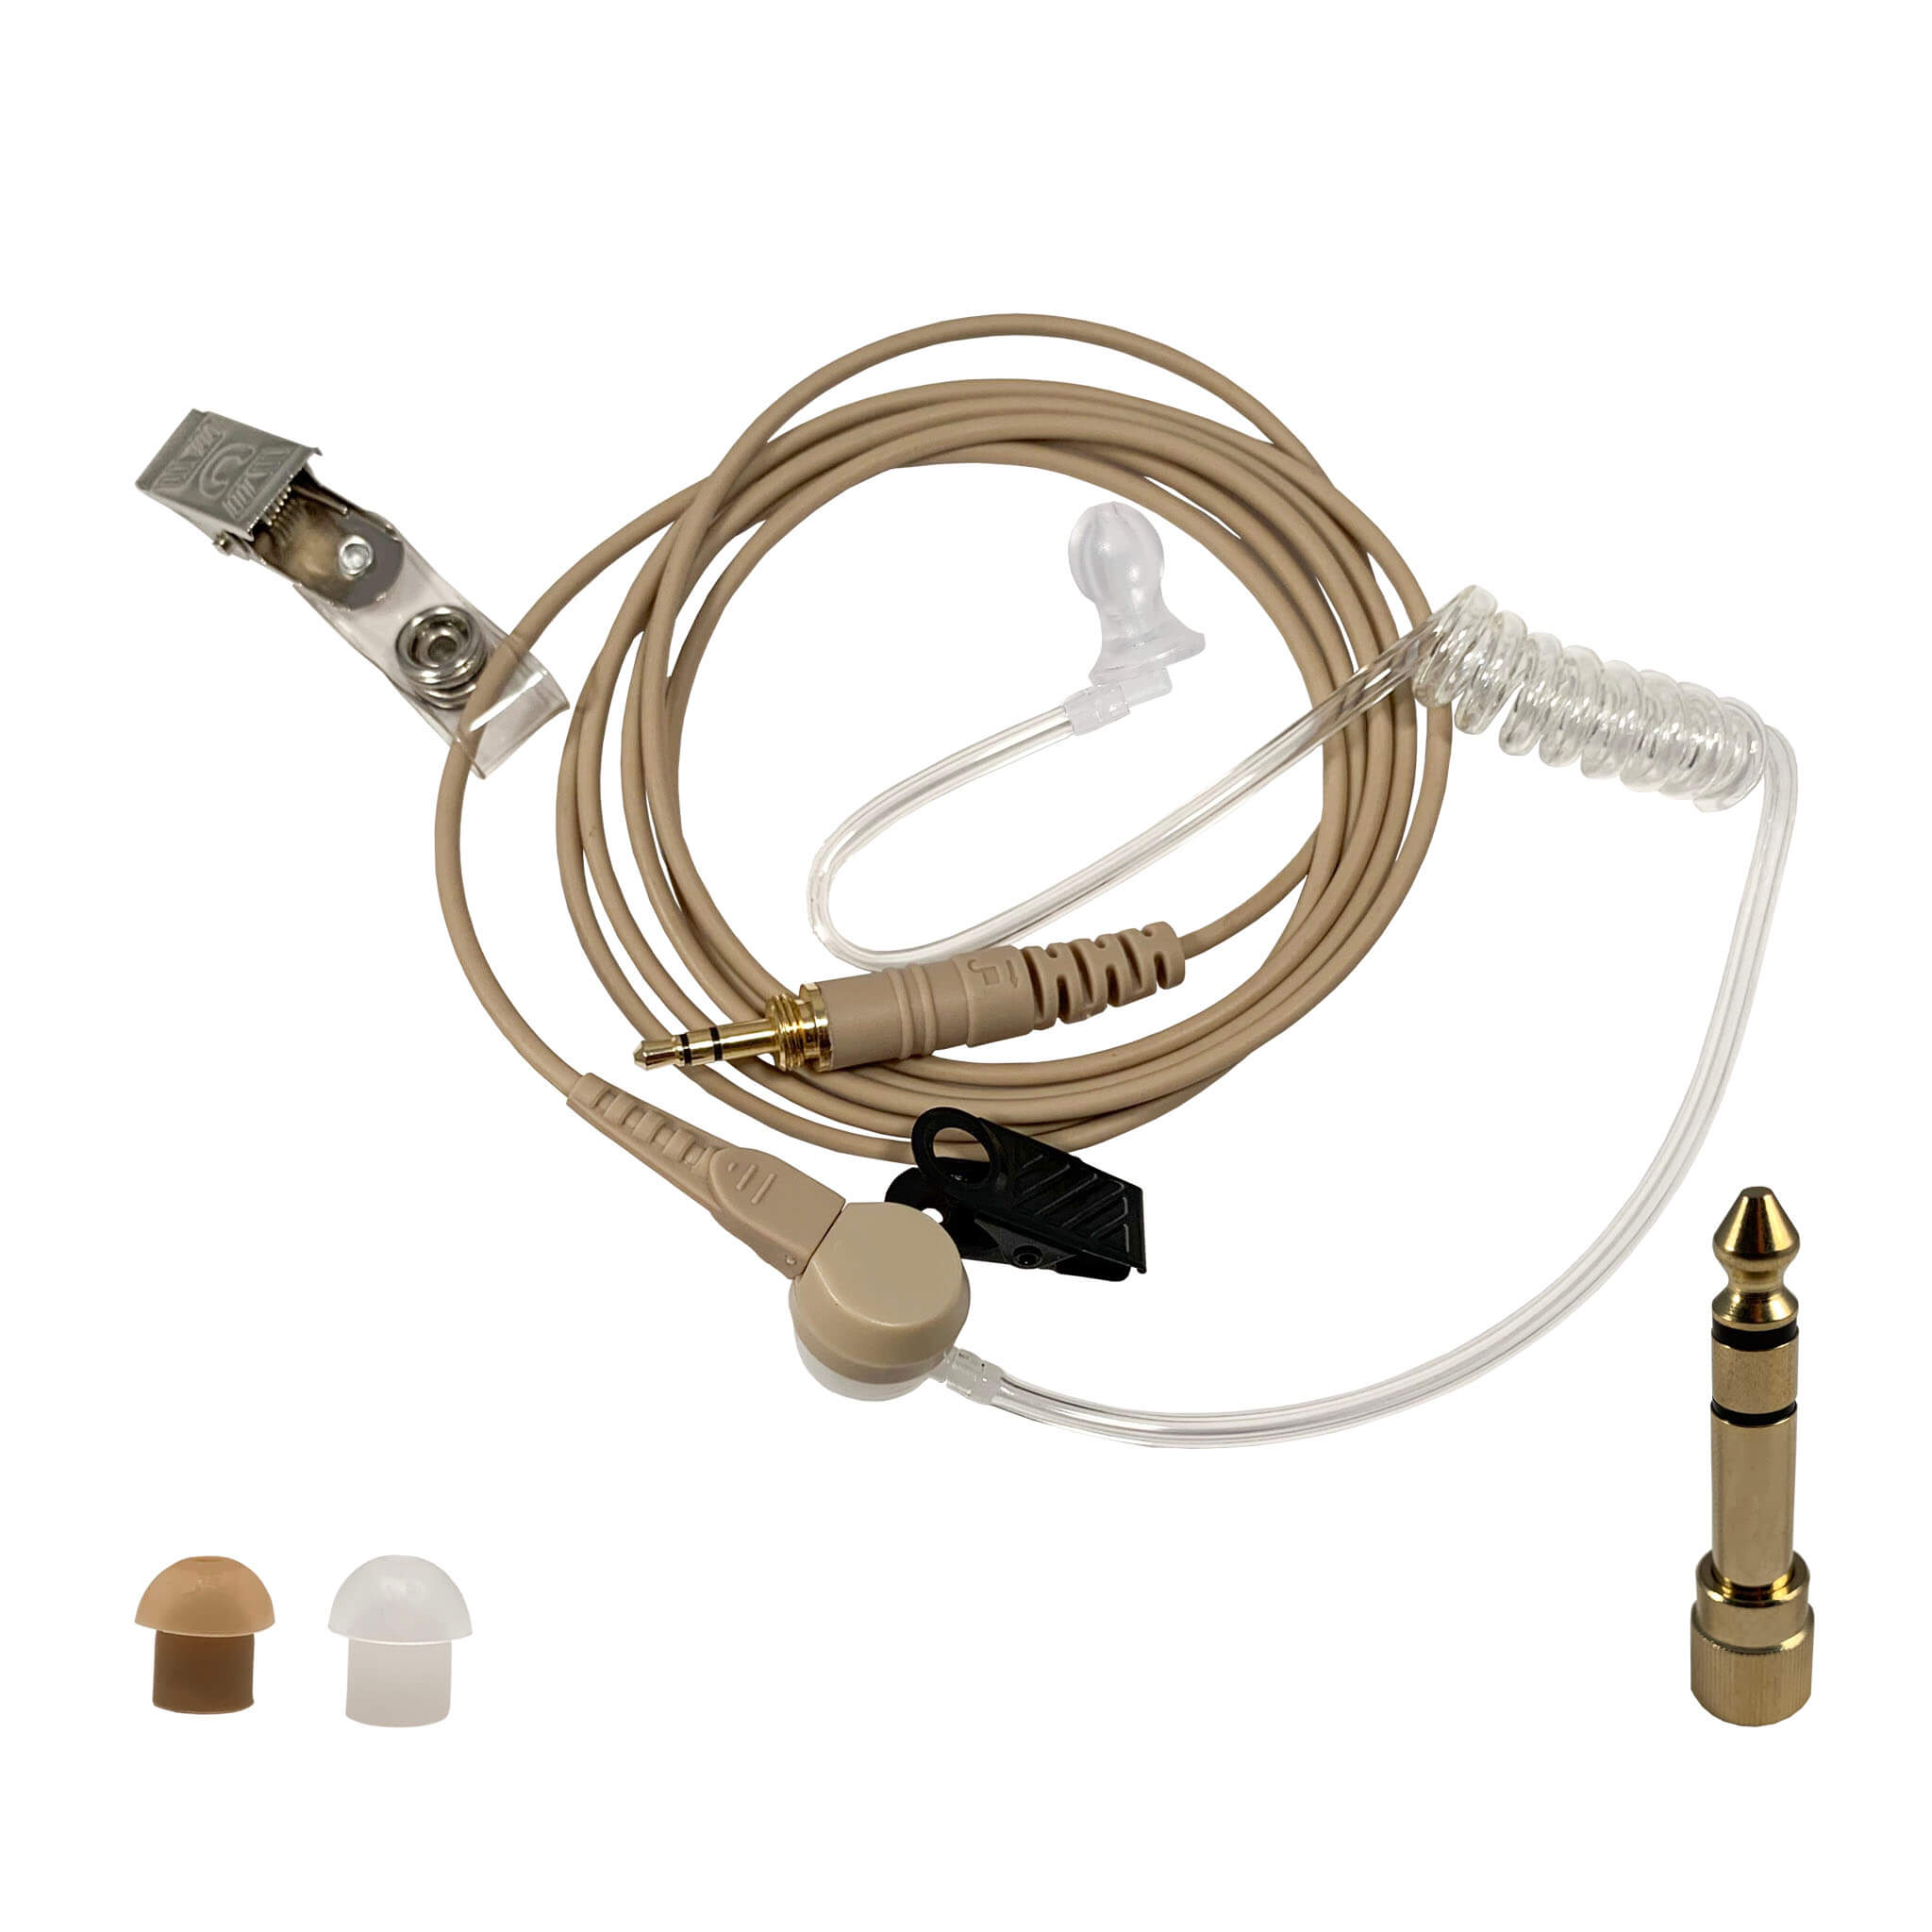 Professional IFB Clear Tube Earpiece Kit: IFB-1/4 - 1/4 Inch Connector & 3.5mm Connector